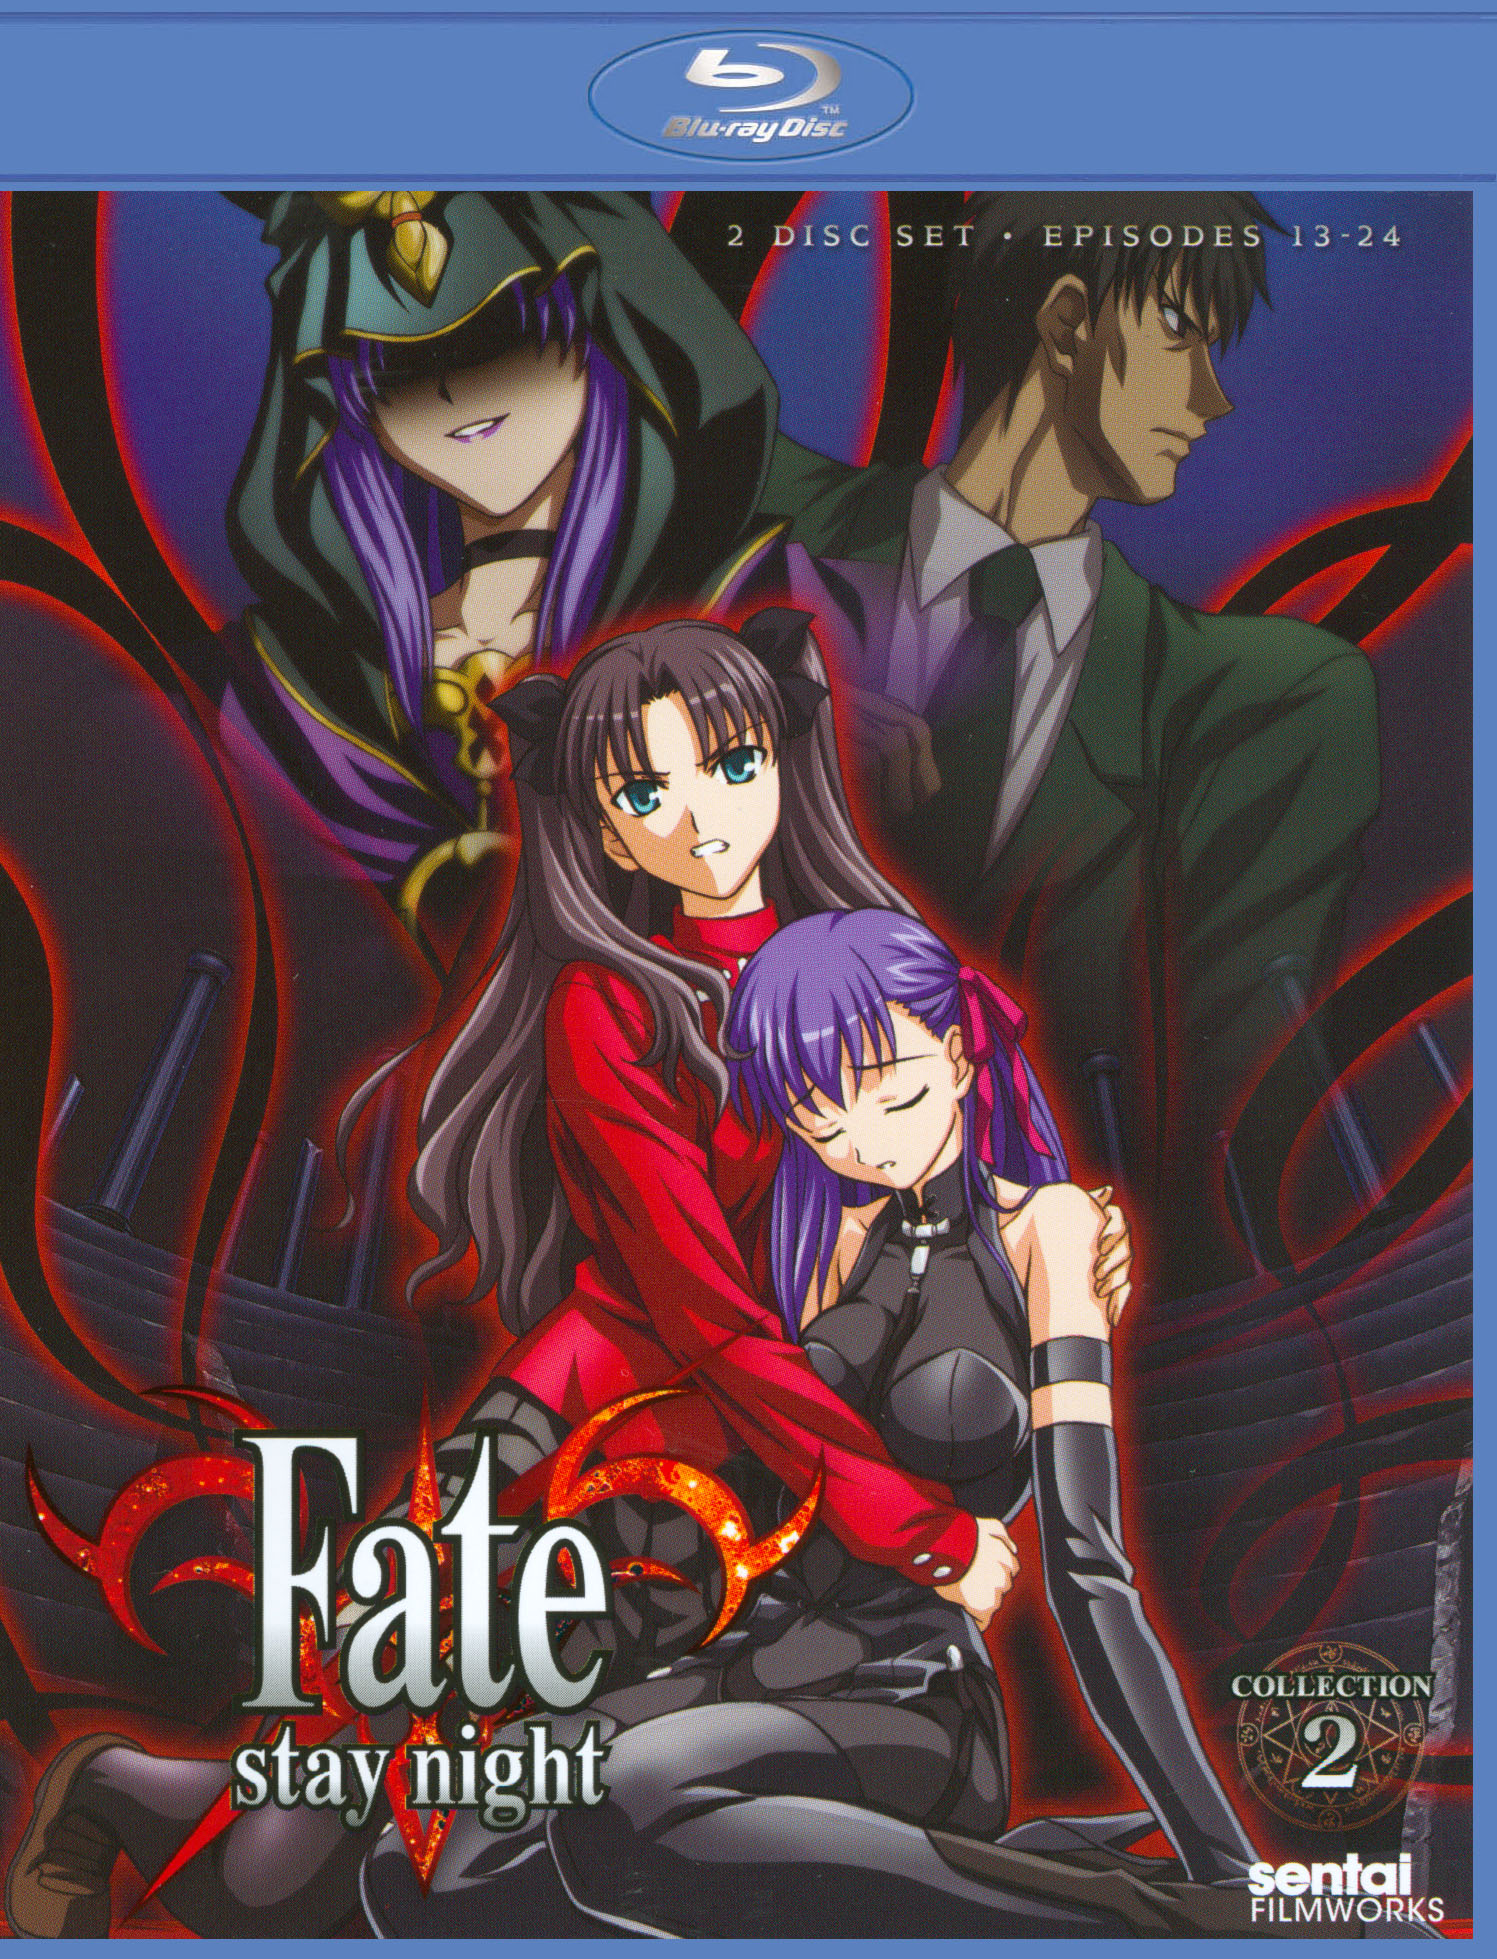 Best Buy: Fate/Stay Night: Collection 2 [2 Discs] [Blu-ray]